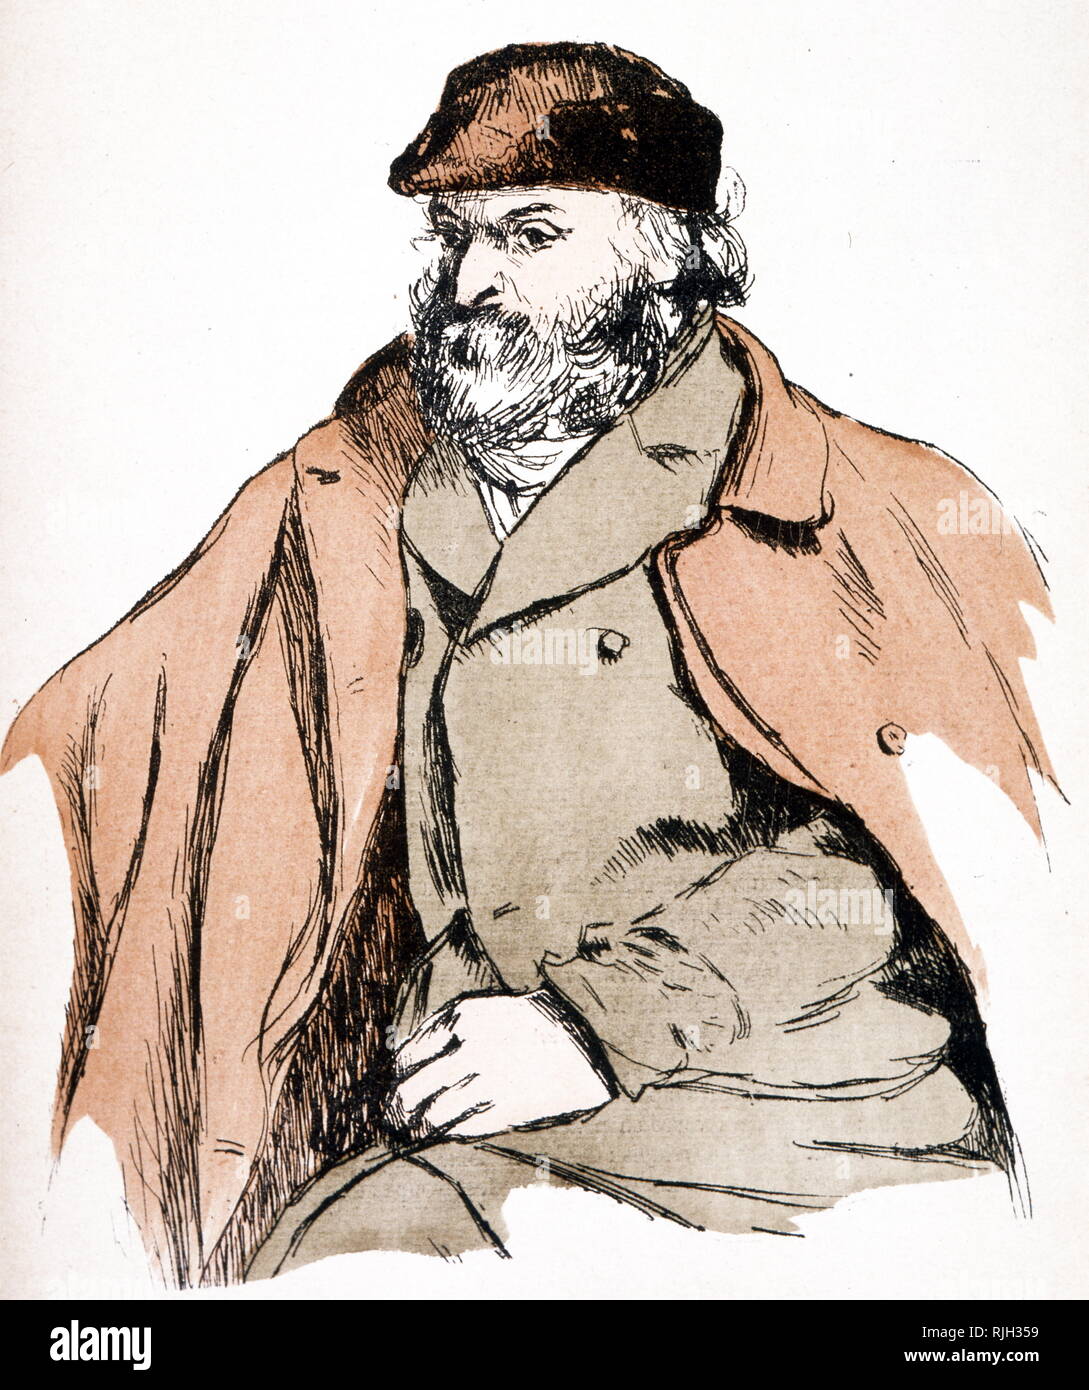 Illustration portrait of Paul Cezanne (1839 - 1906) French artist and Post-Impressionist painter Stock Photo